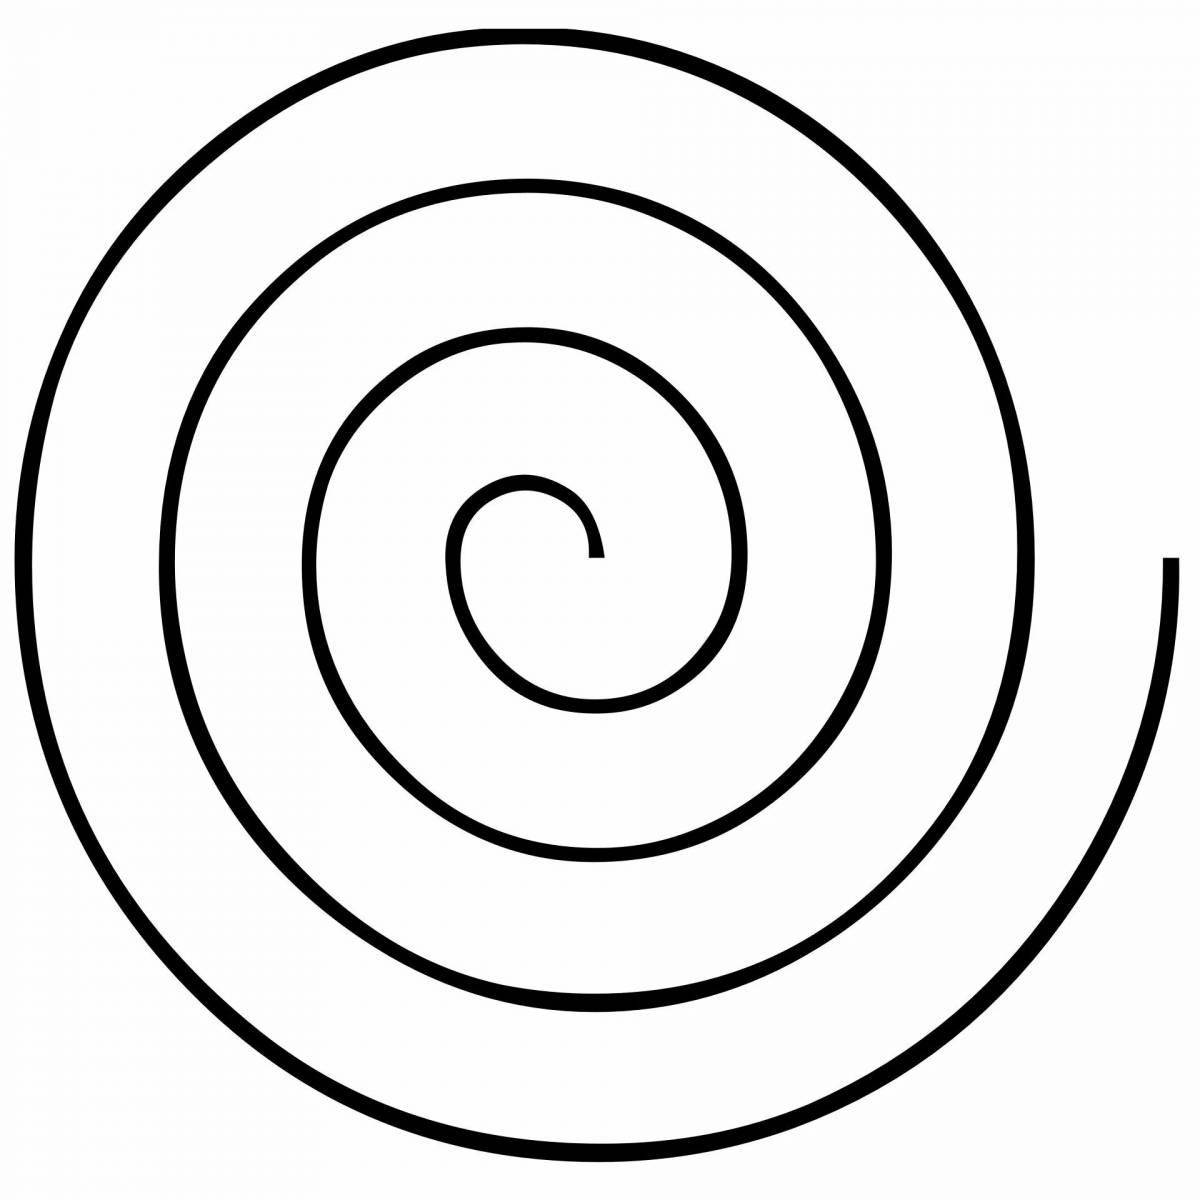 Coloring page hypnotic spiral